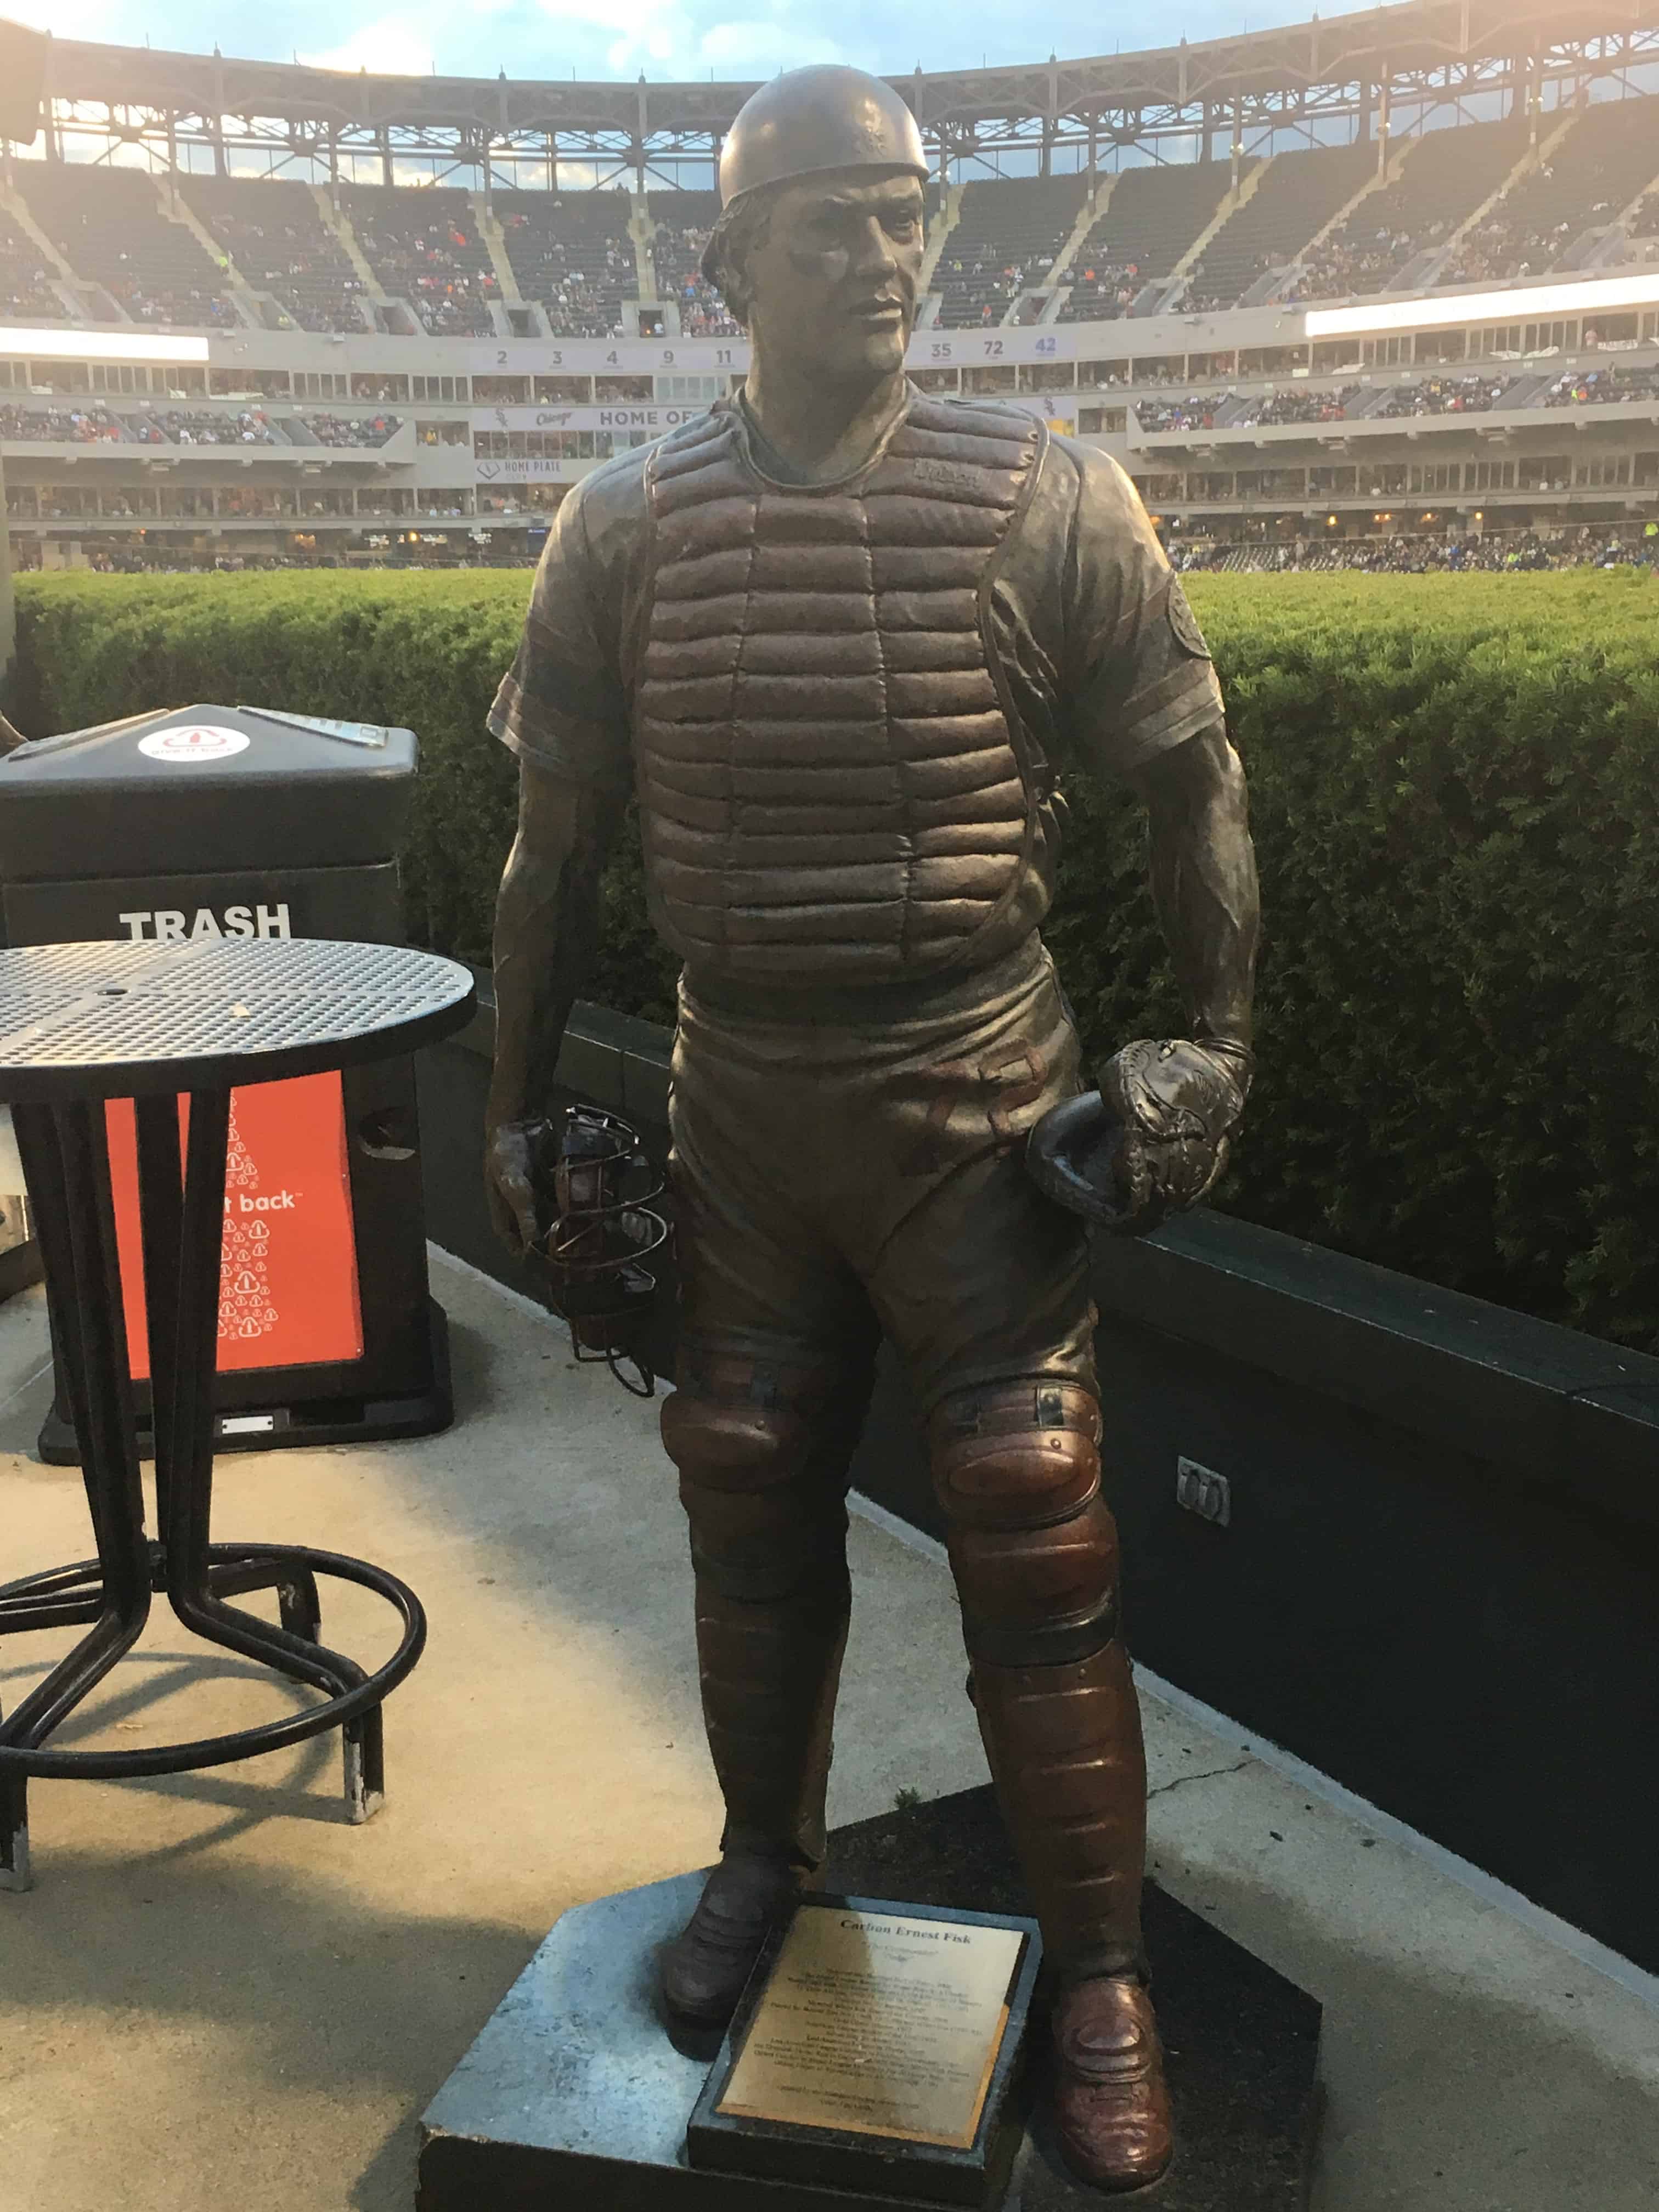 Carlton Fisk statue at Guaranteed Rate Field in Chicago, Illinois